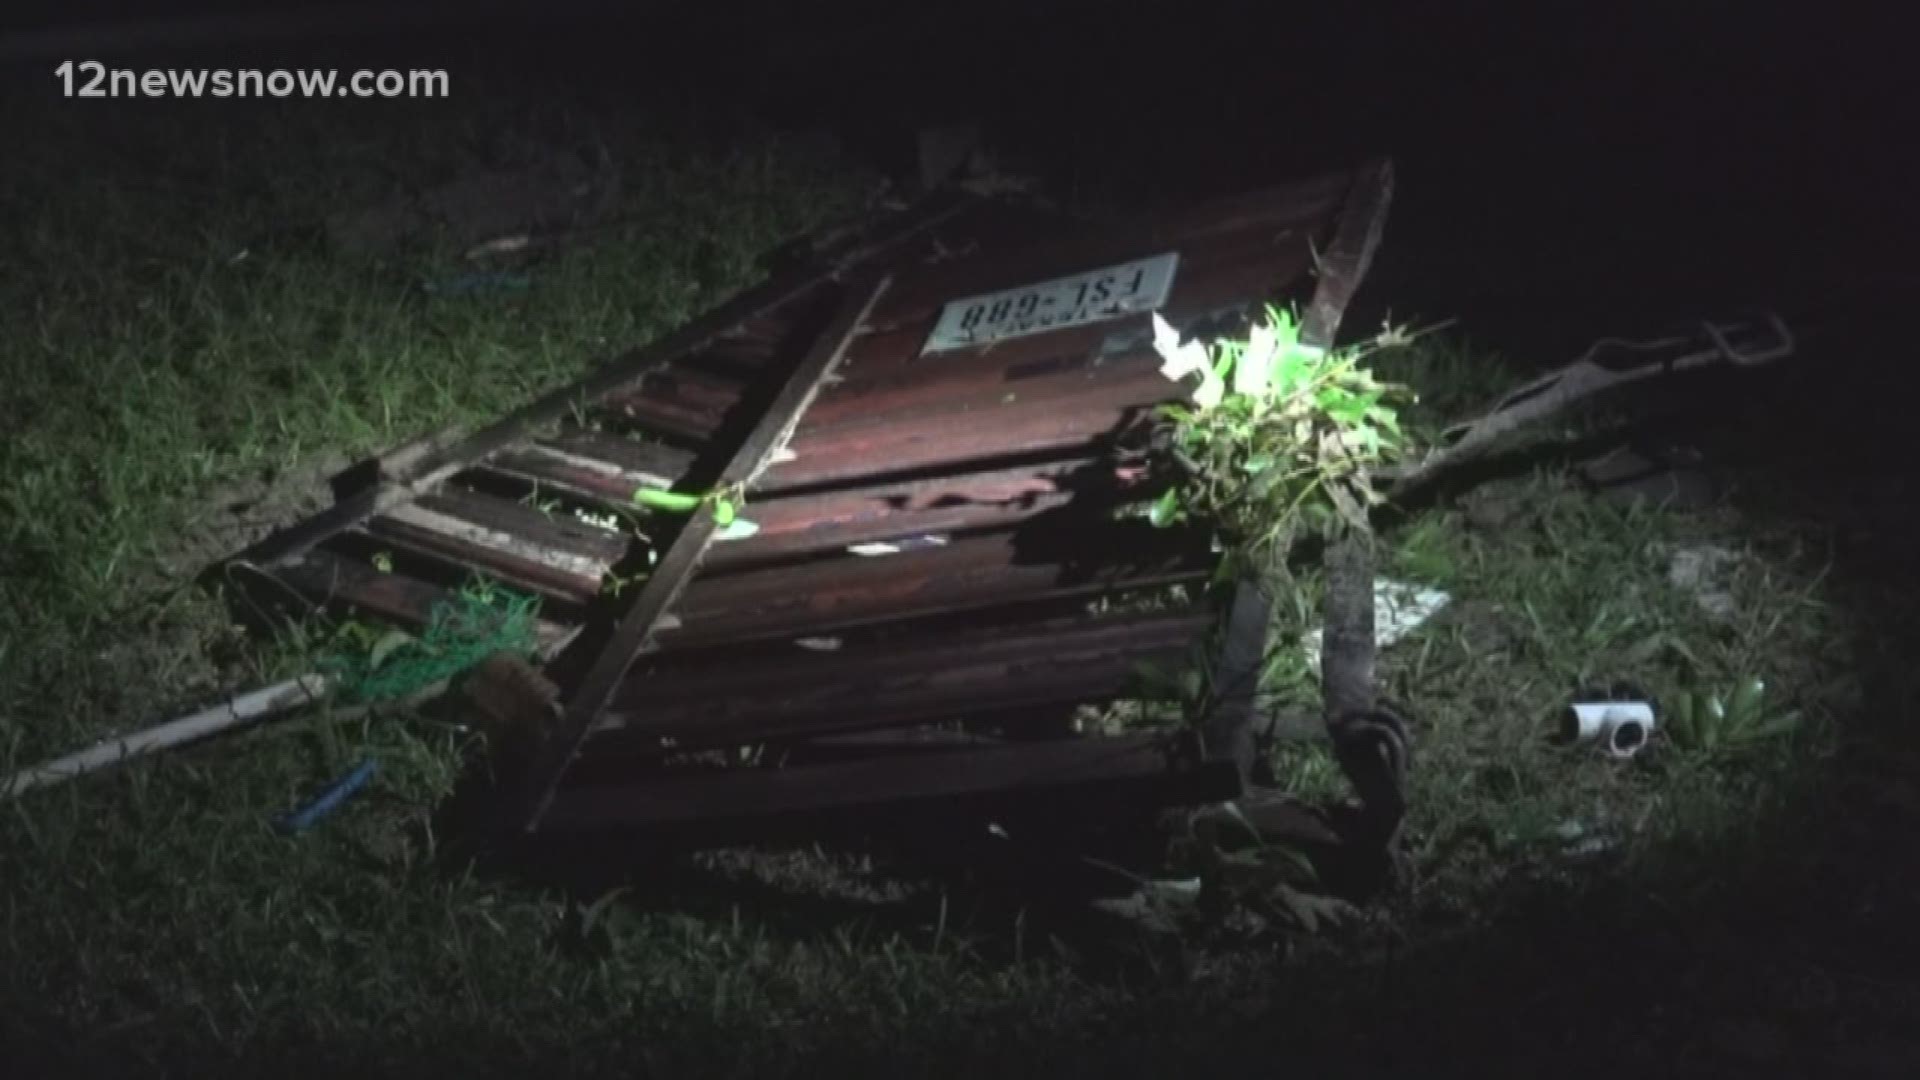 A tornado traveling through East Texas Wednesday night left at least three people dead in Polk County before barreling through Tyler, Jasper and Newton Counties.